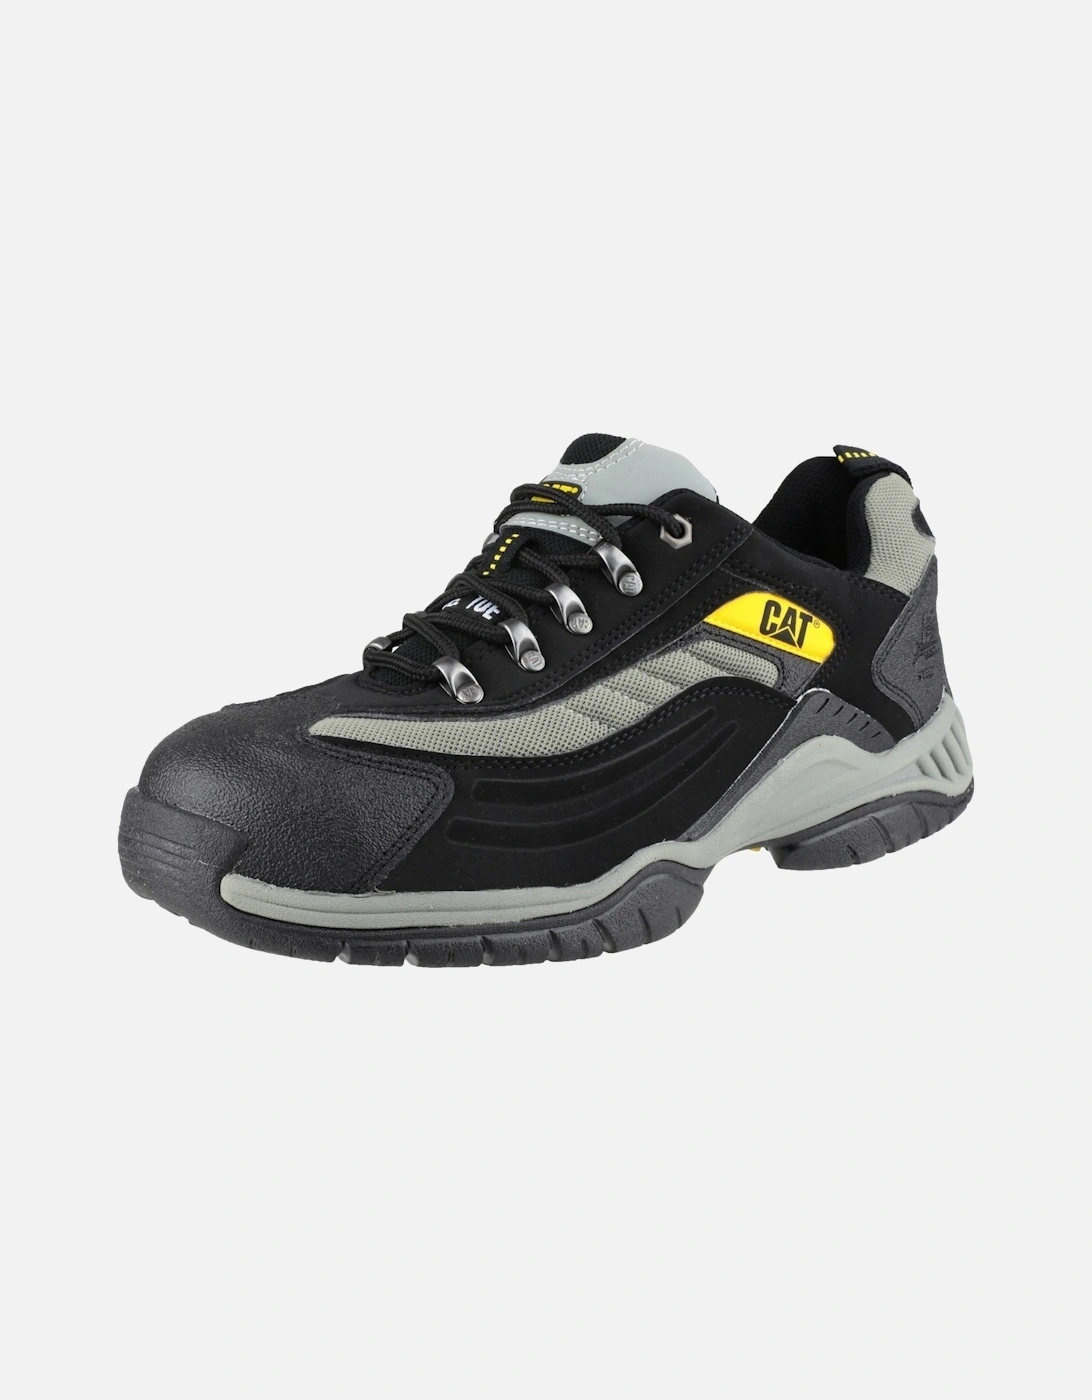 Moor Safety Trainer / Unisex Safety Shoes